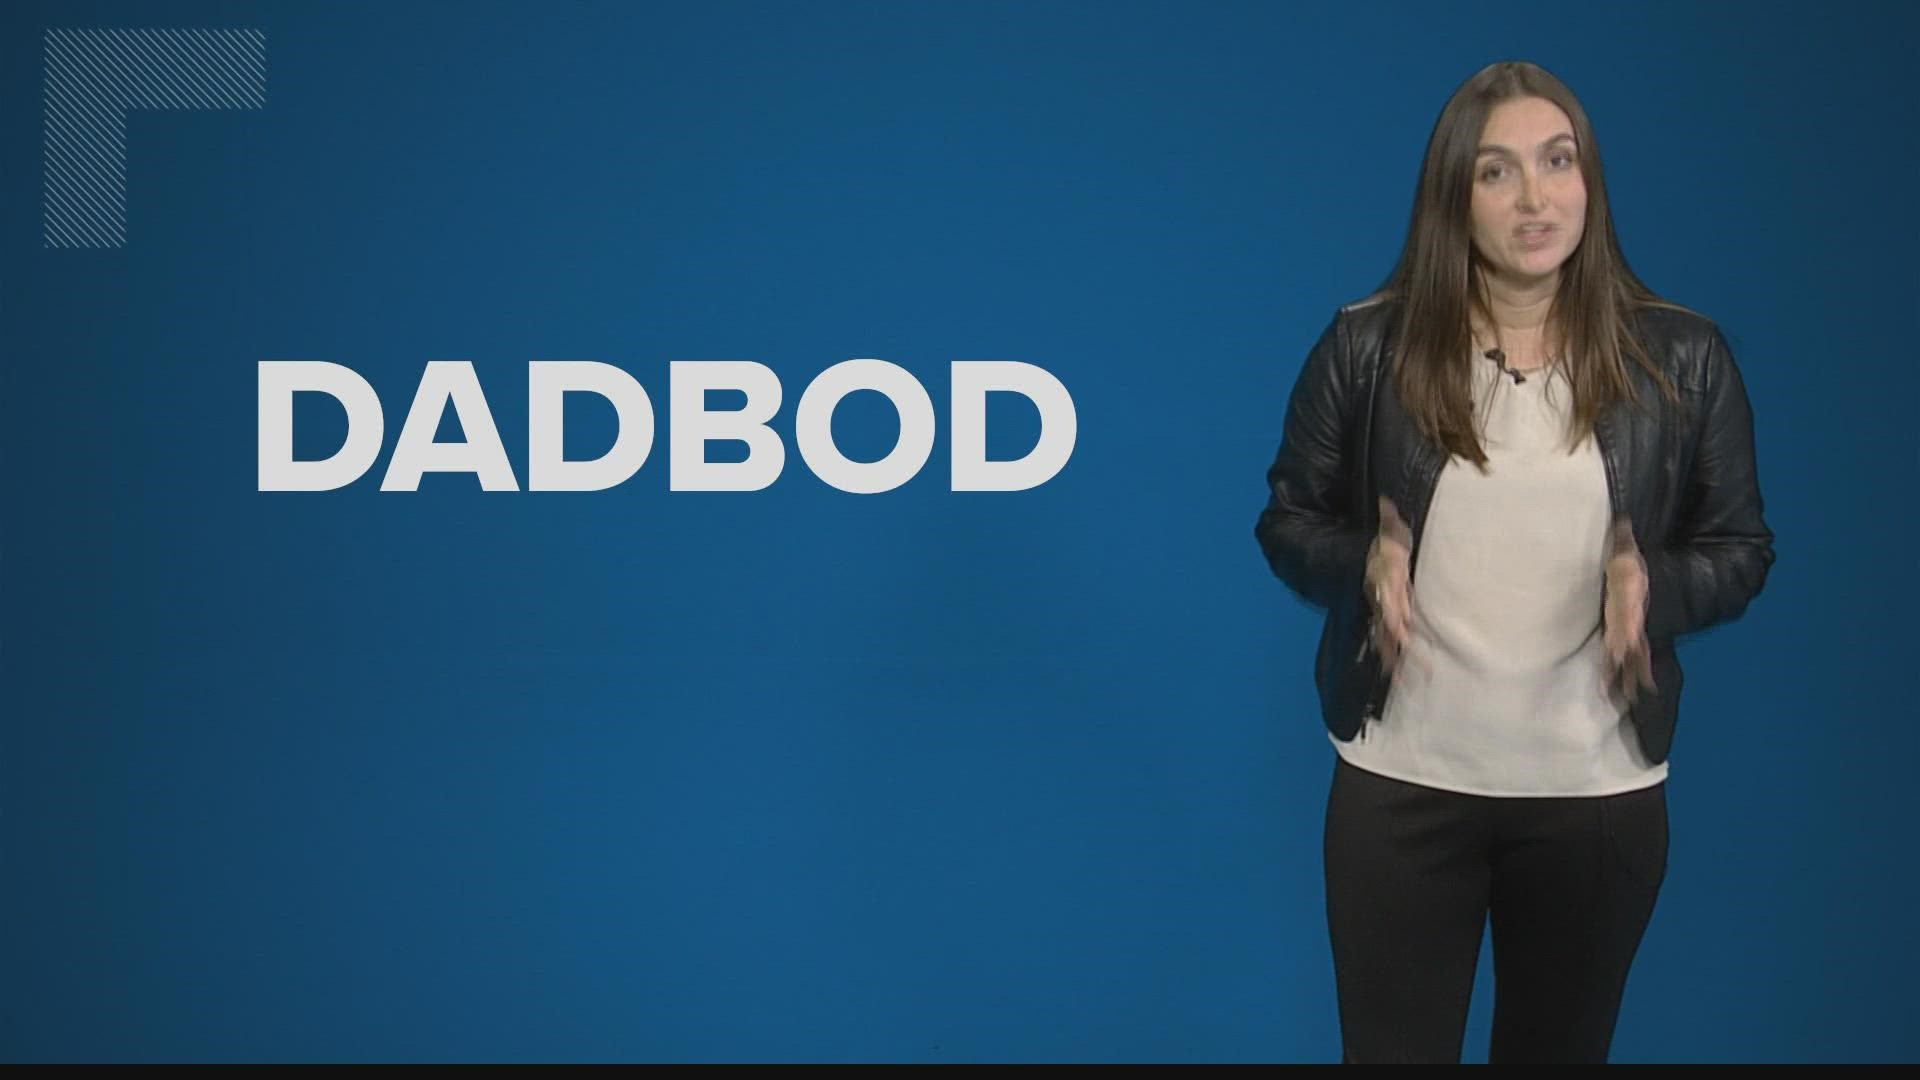 "Dadbod" is defined as "a physique regarded as typical of an average father."